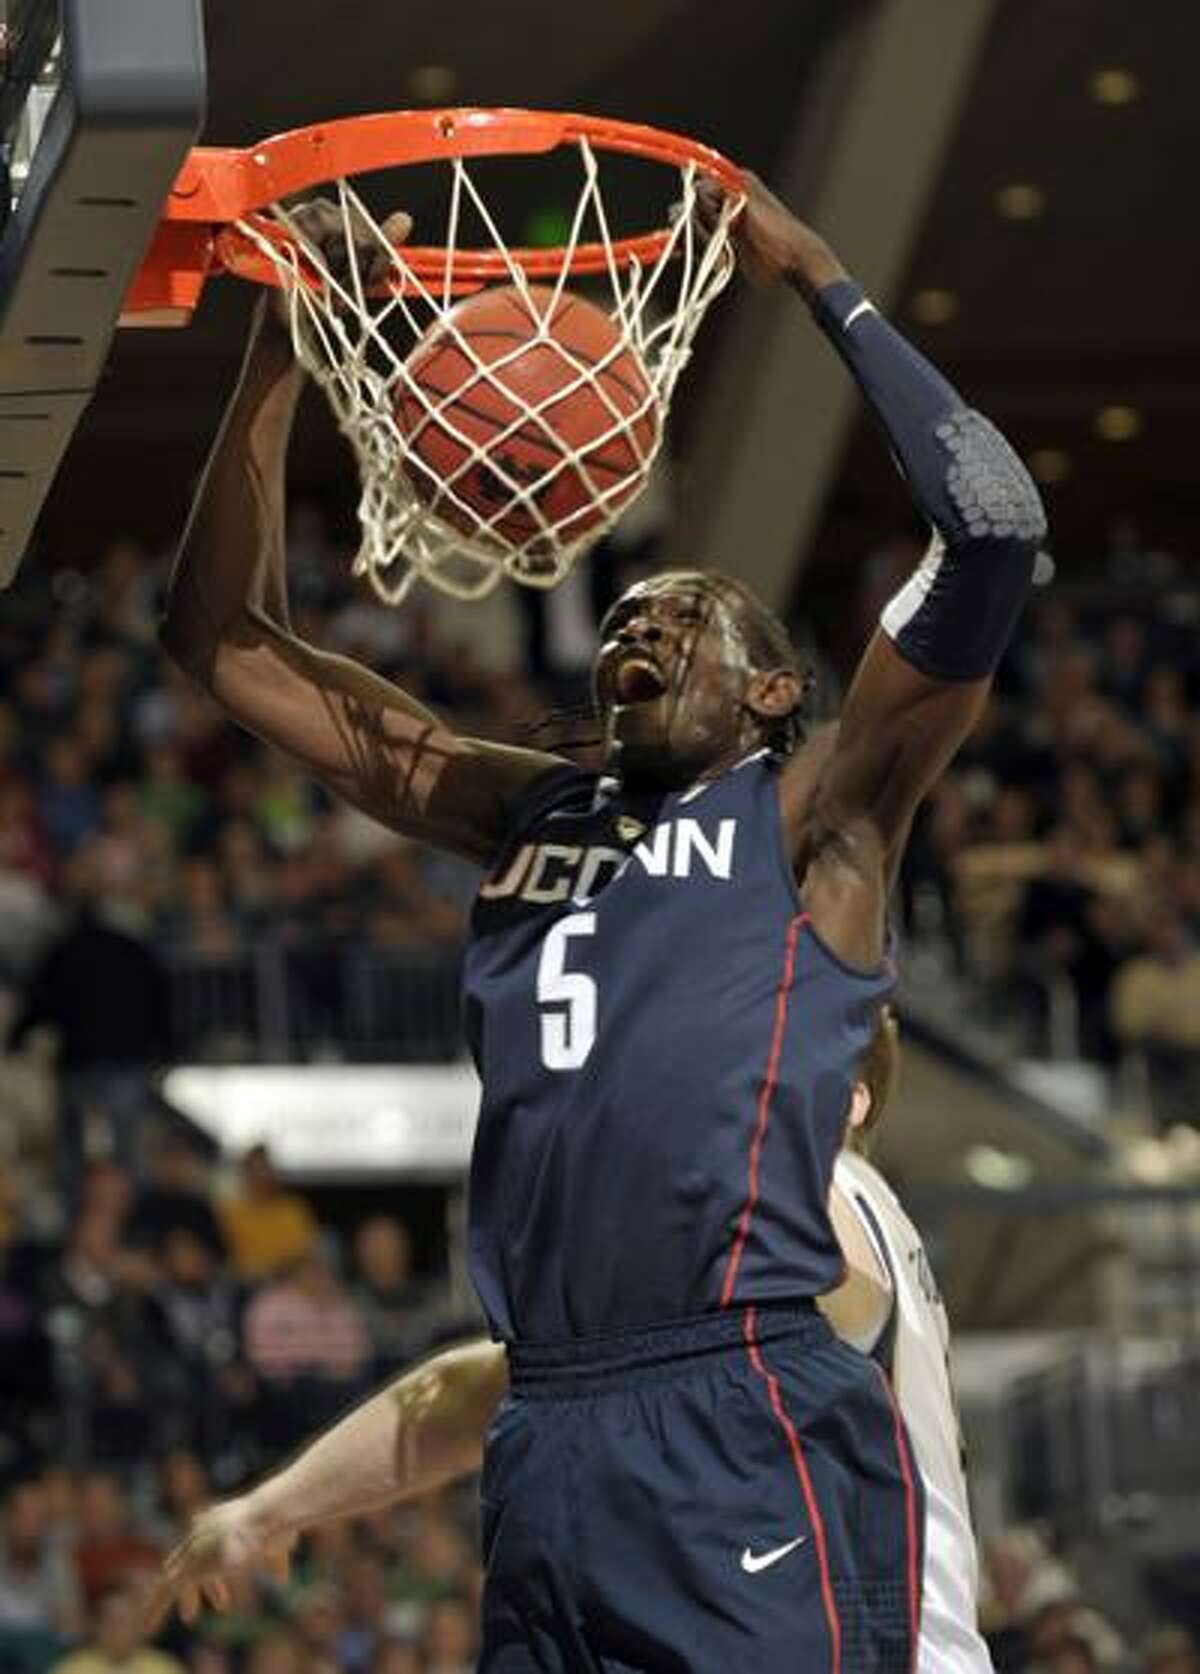 Connecticut forward Ater Majok dunks the ball in the first half of an NCAA college basketball game against Notre Dame Wednesday, March 3. (AP)